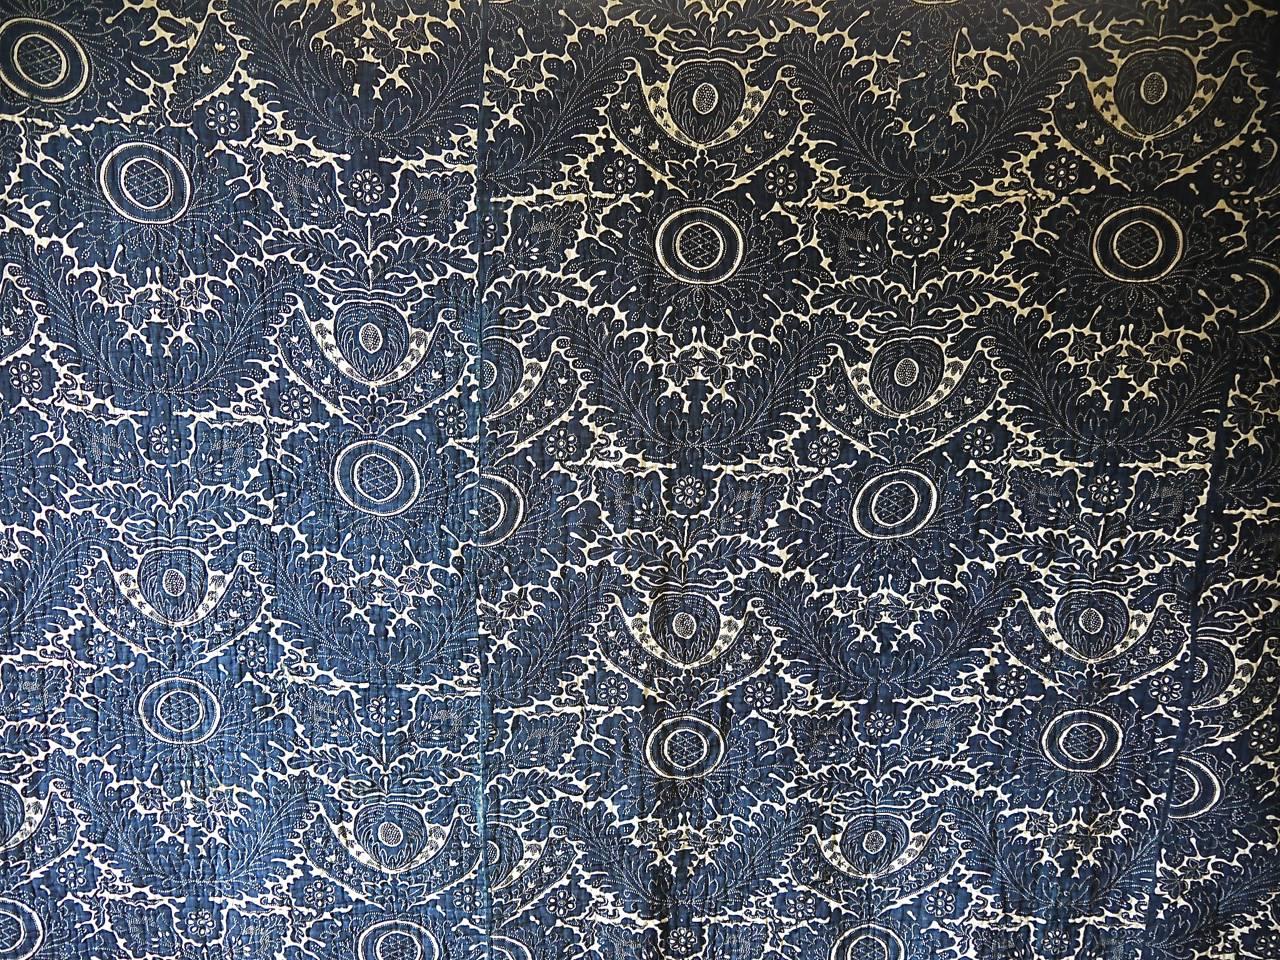 18th century, French indigo resist quilt, block printed on a siamoise (cotton and linen) cloth. Stylized design with arching acanthus leaves. Backed in a late 18th century block printed design of flowered baskets.
A wonderful rare piece.